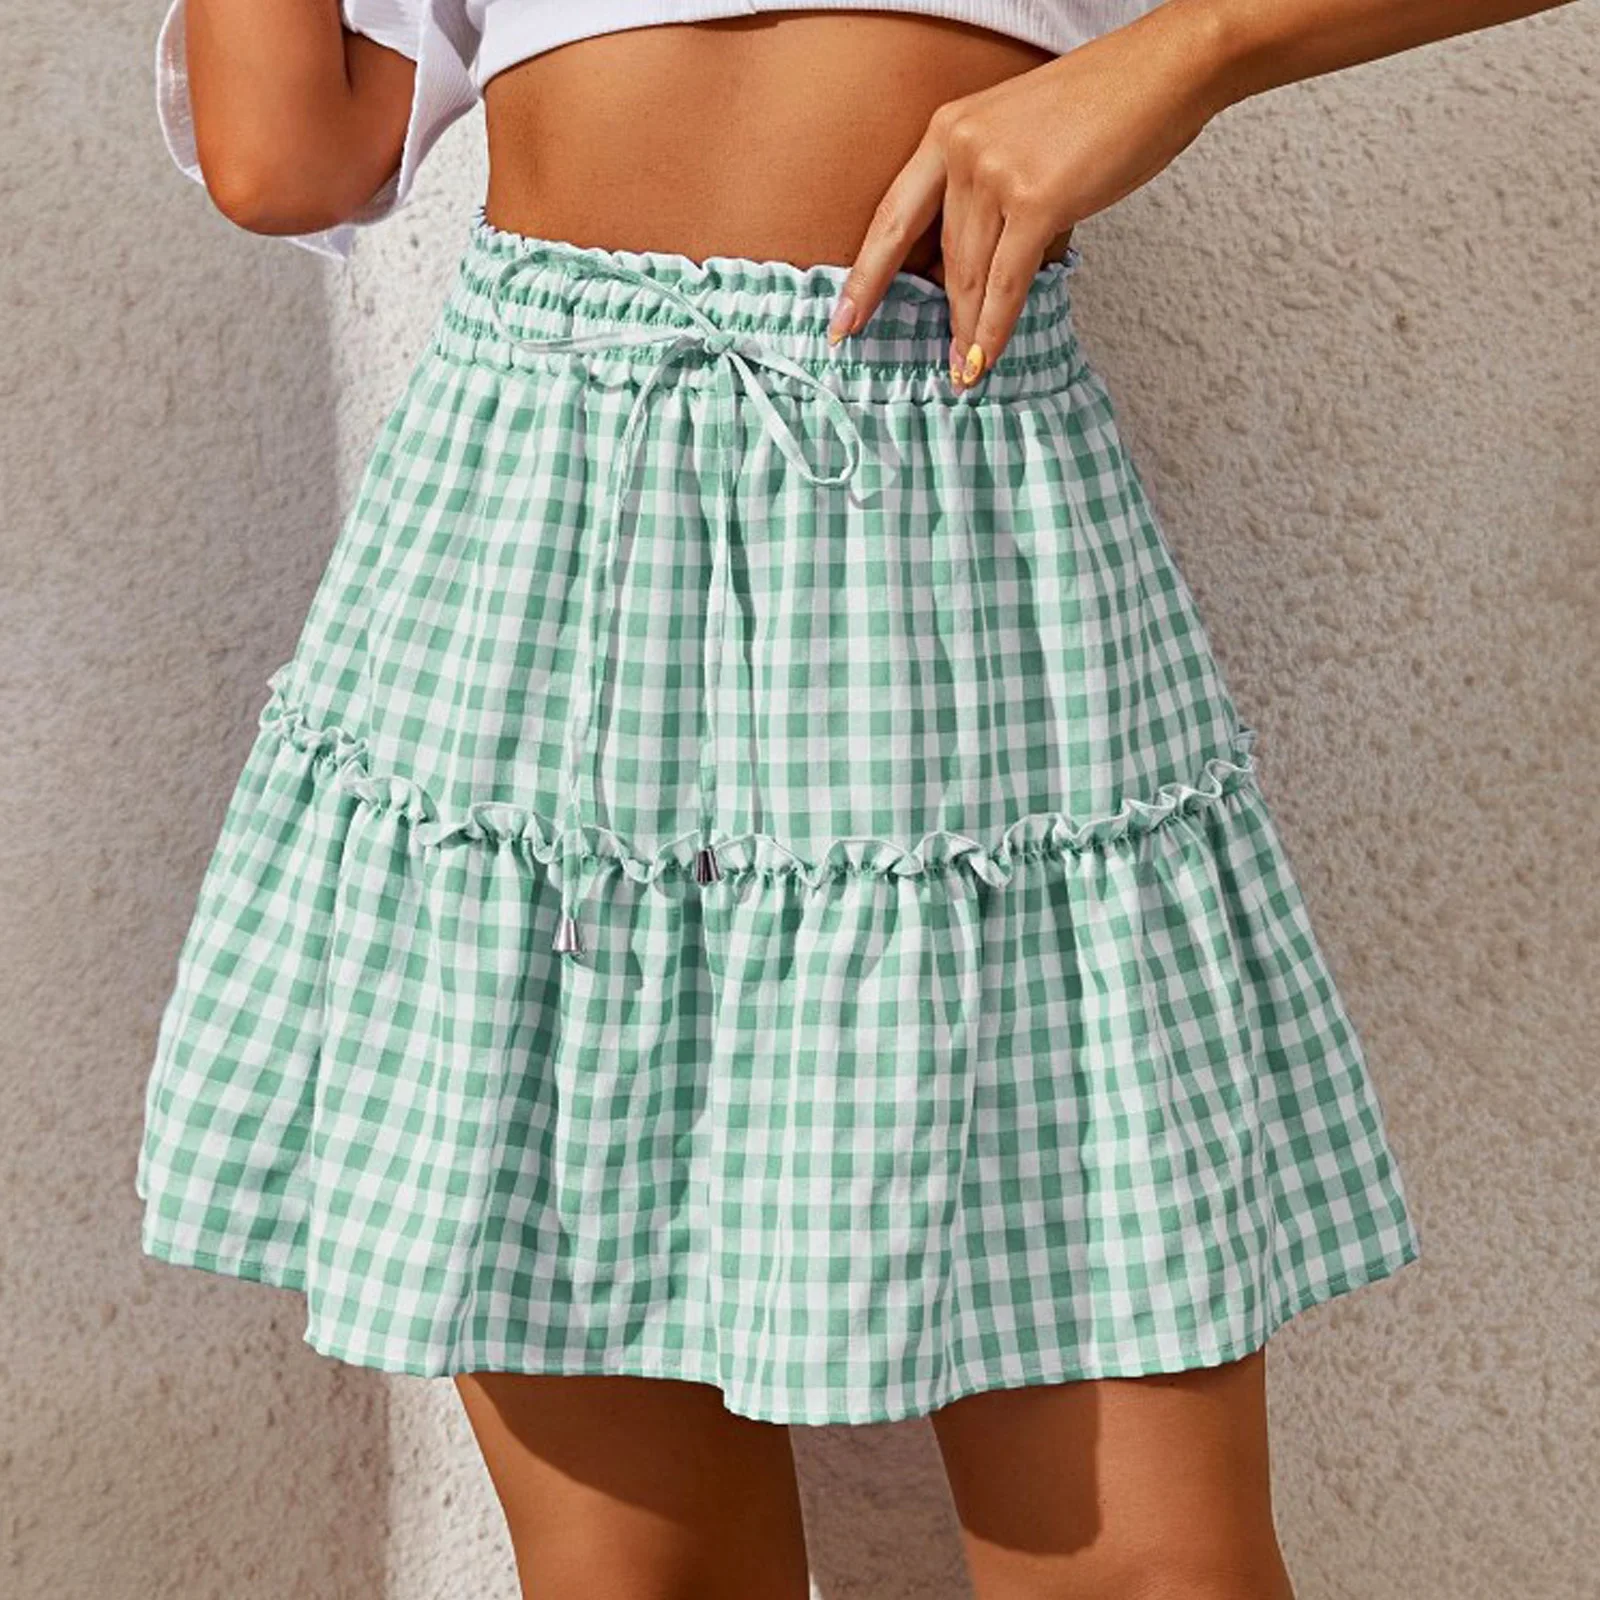 

Womens Cute Frilly Plaid Skirt Casual High Waist Bowknot Elastic Waistband Skirts for Vacation Holiday Beach Party